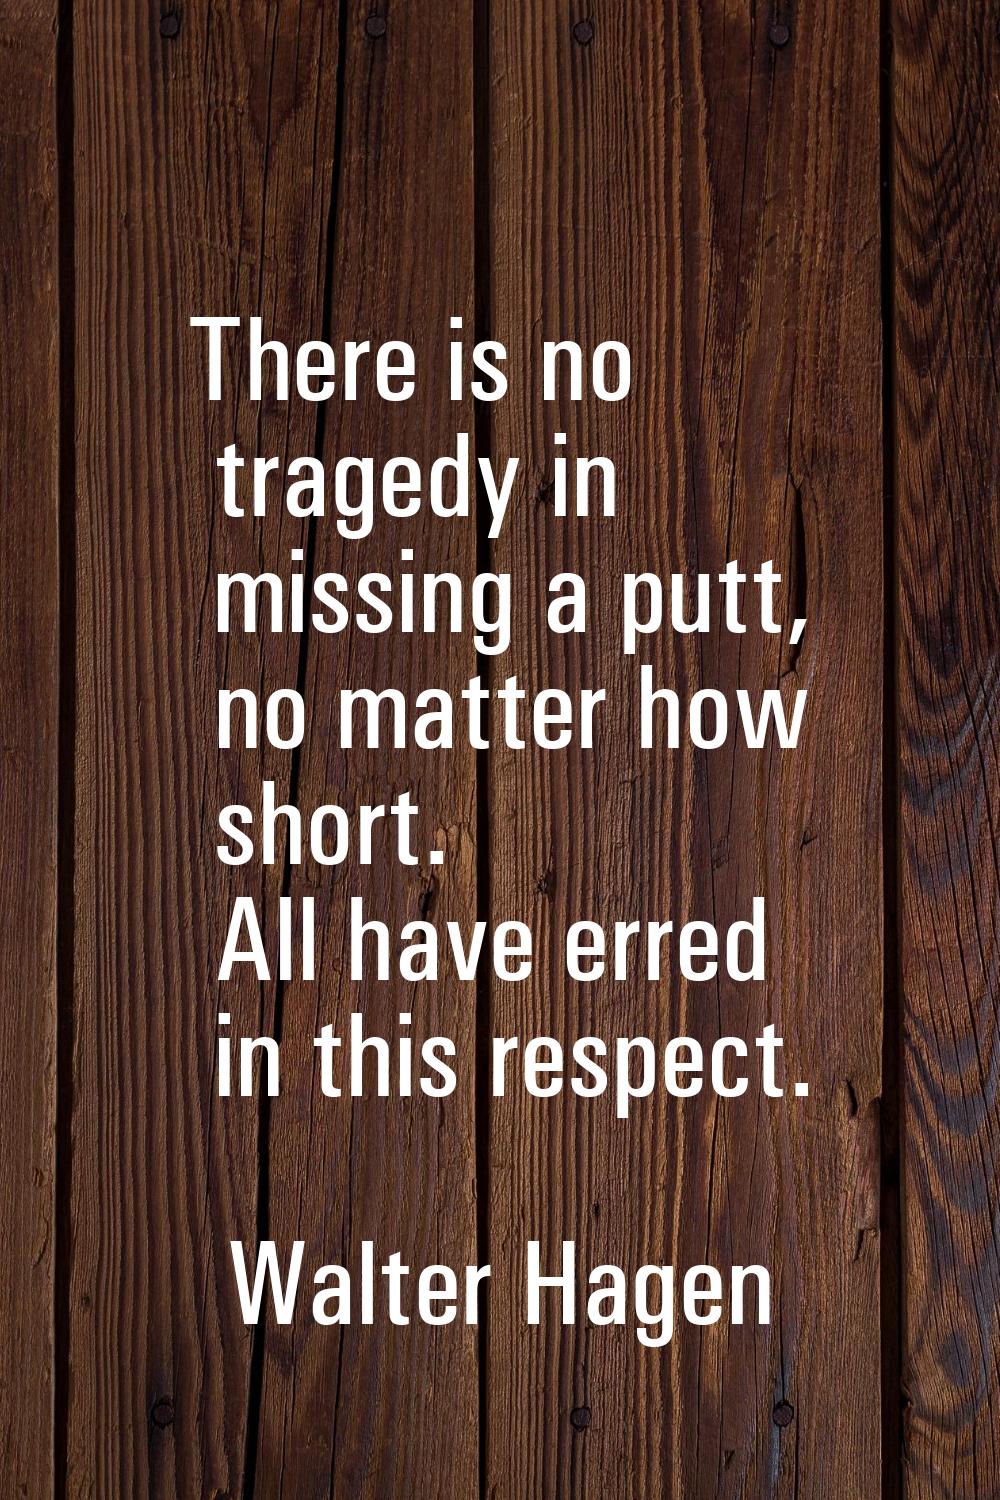 There is no tragedy in missing a putt, no matter how short. All have erred in this respect.